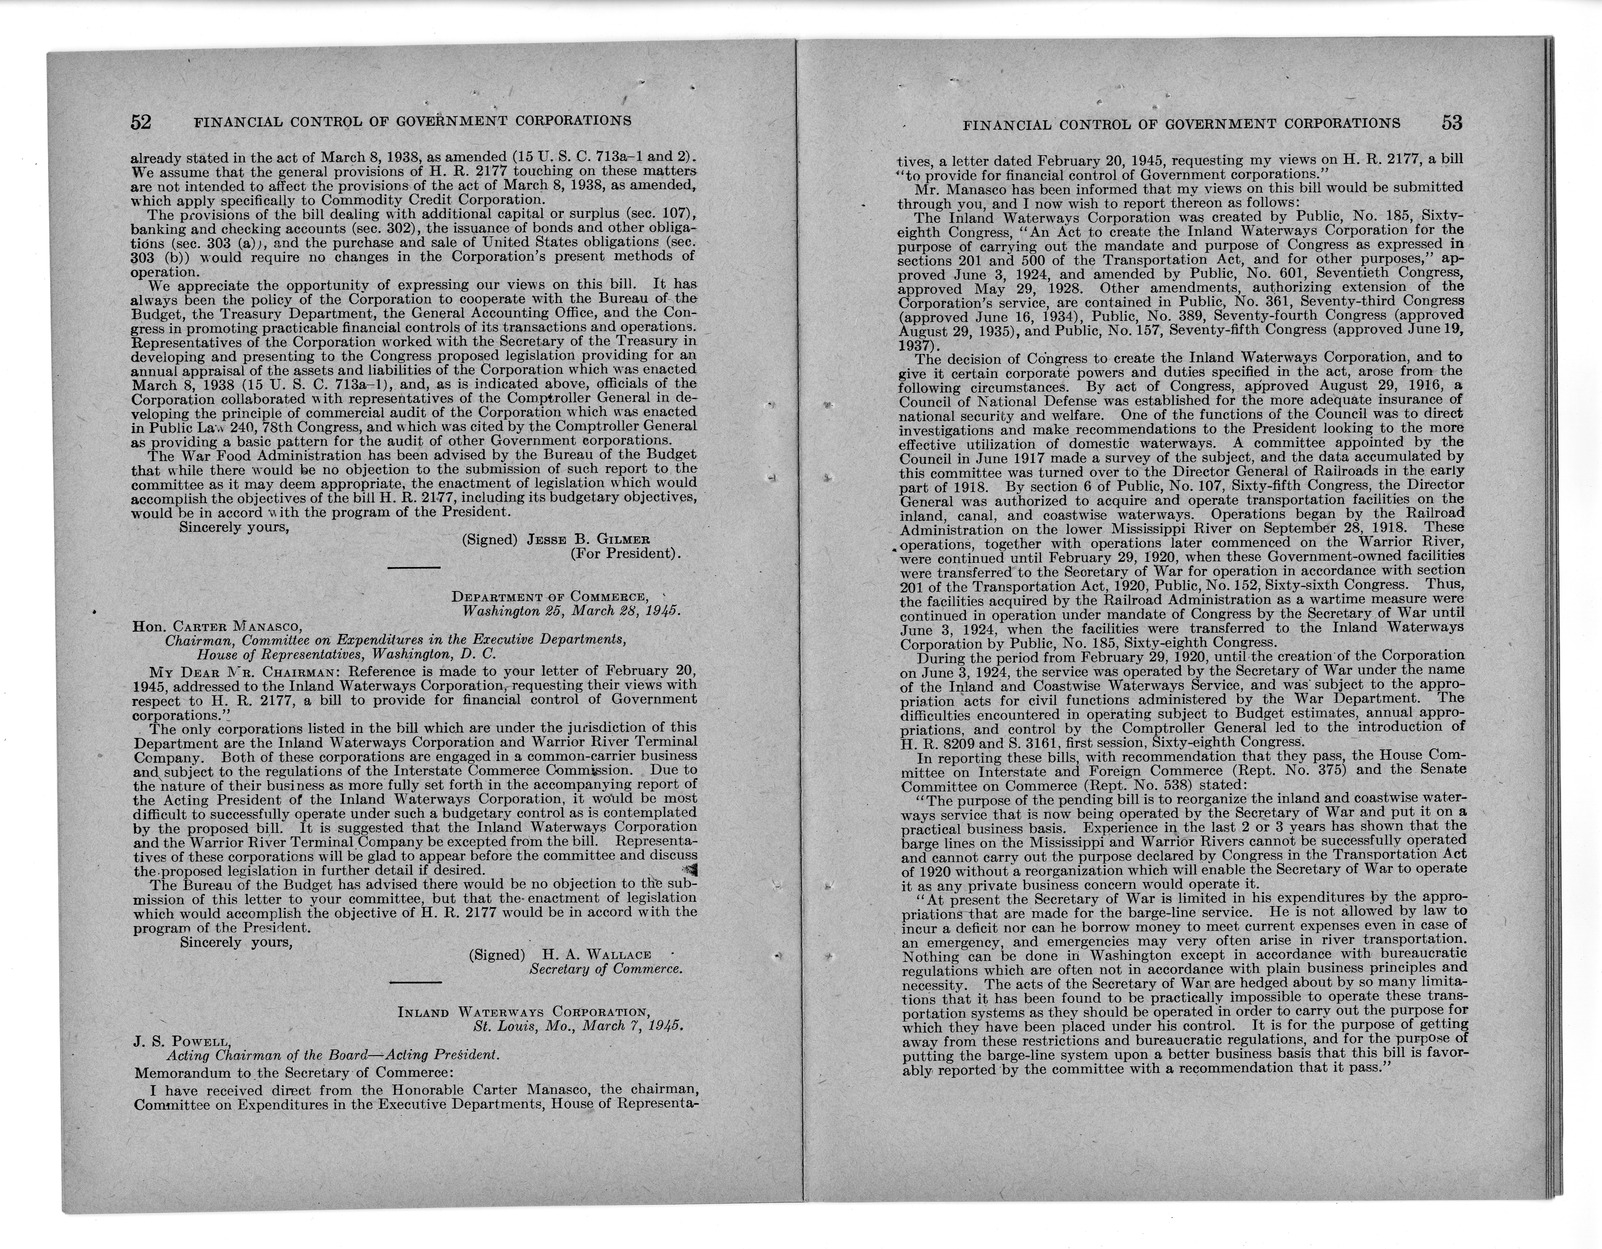 Memorandum from Paul H. Appleby to M. C. Latta, H.R. 3660, To Provide for Financial Control of Government Corporations, with Attachments